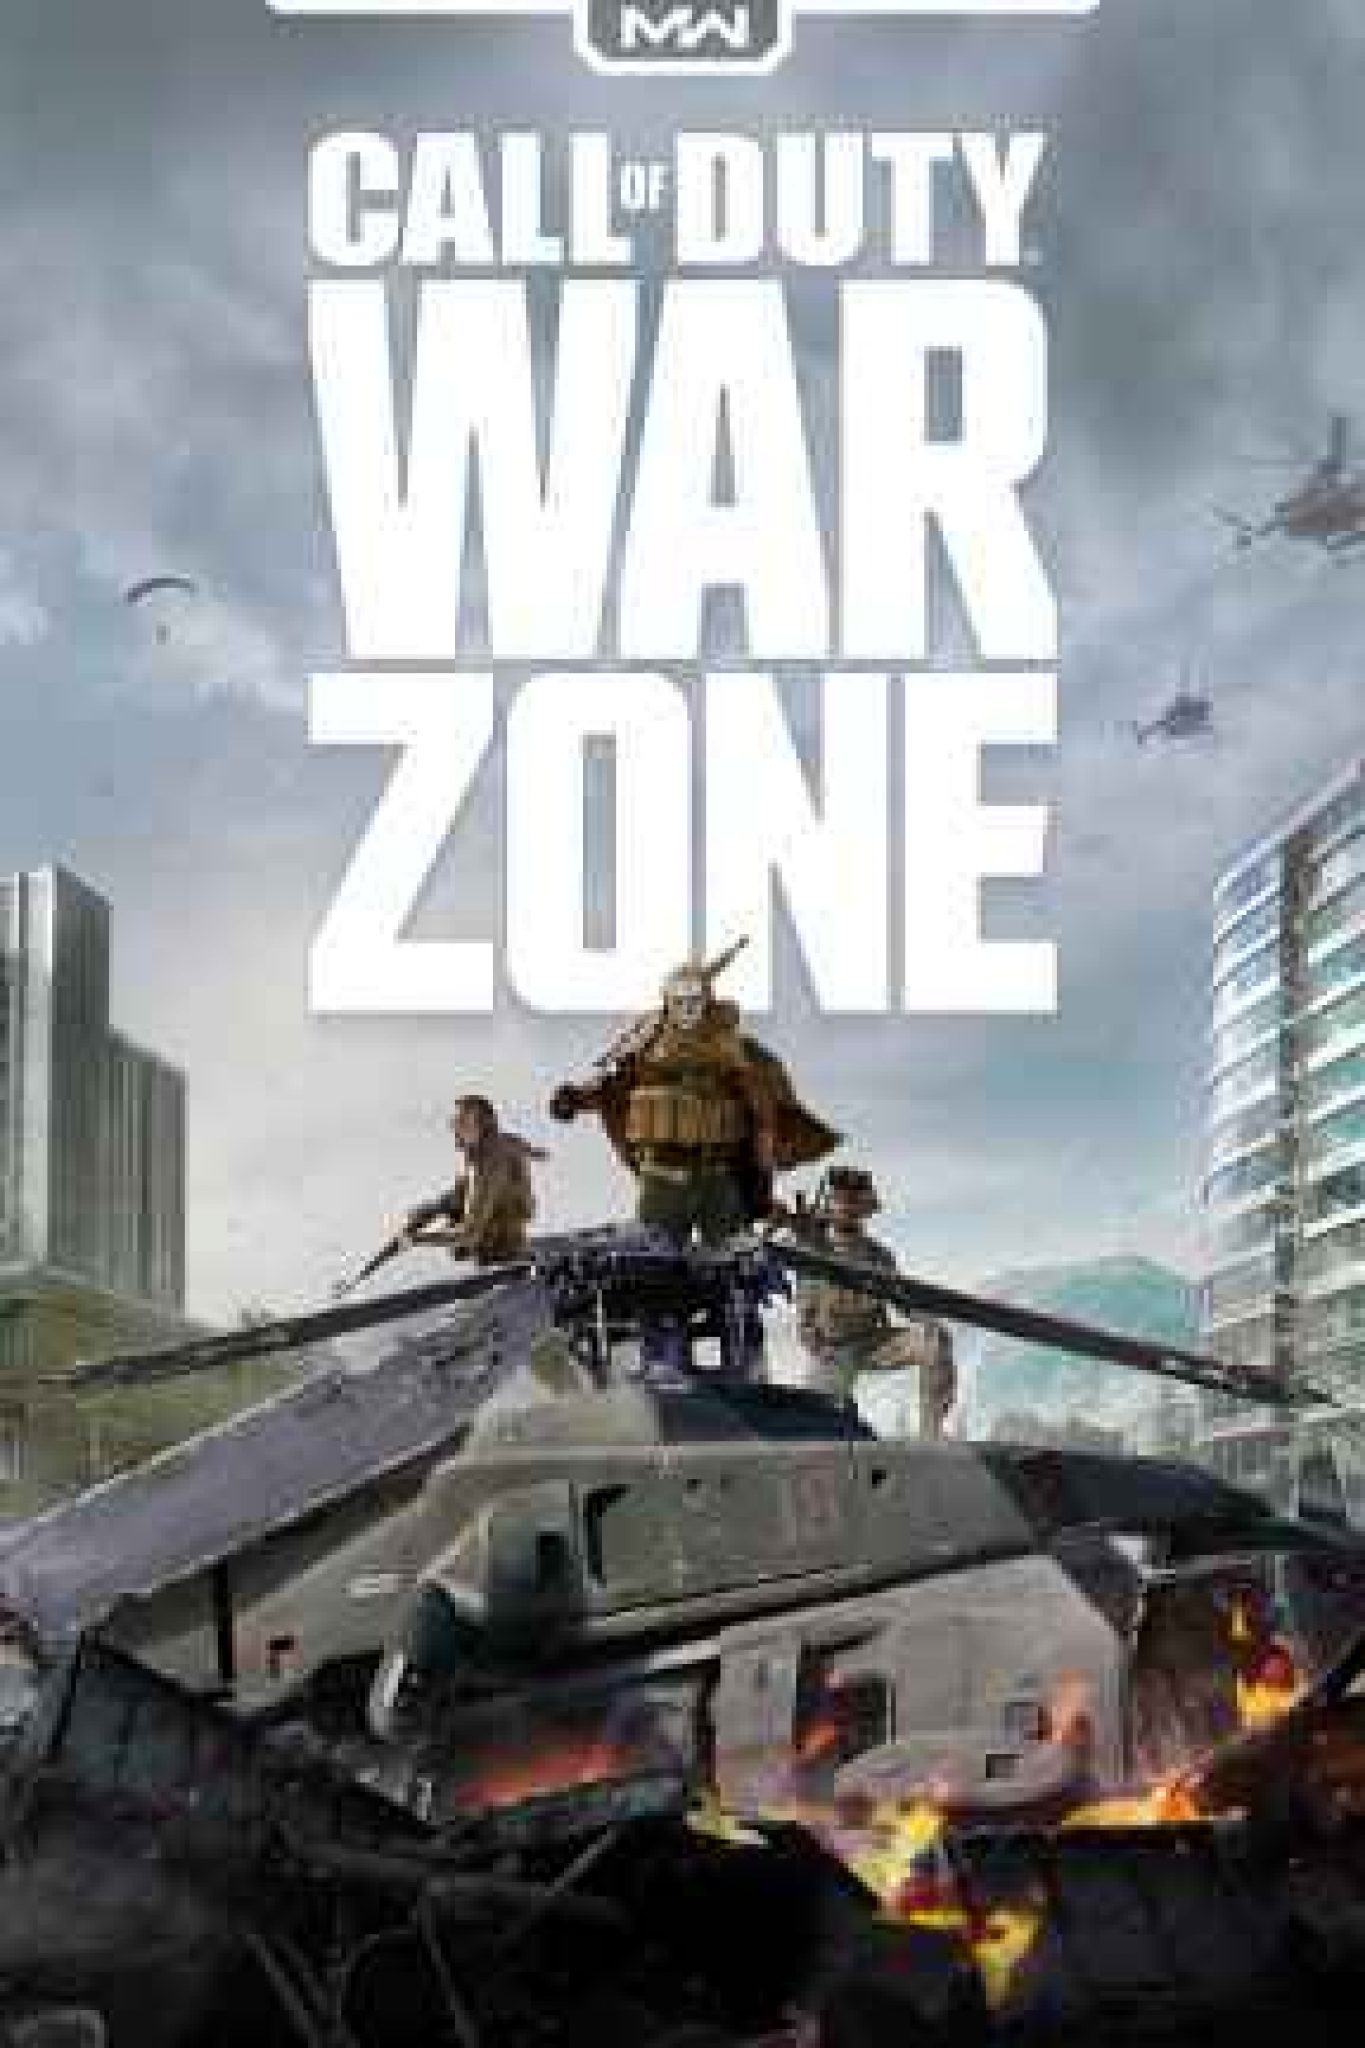 call of duty warzone download pc windows 10